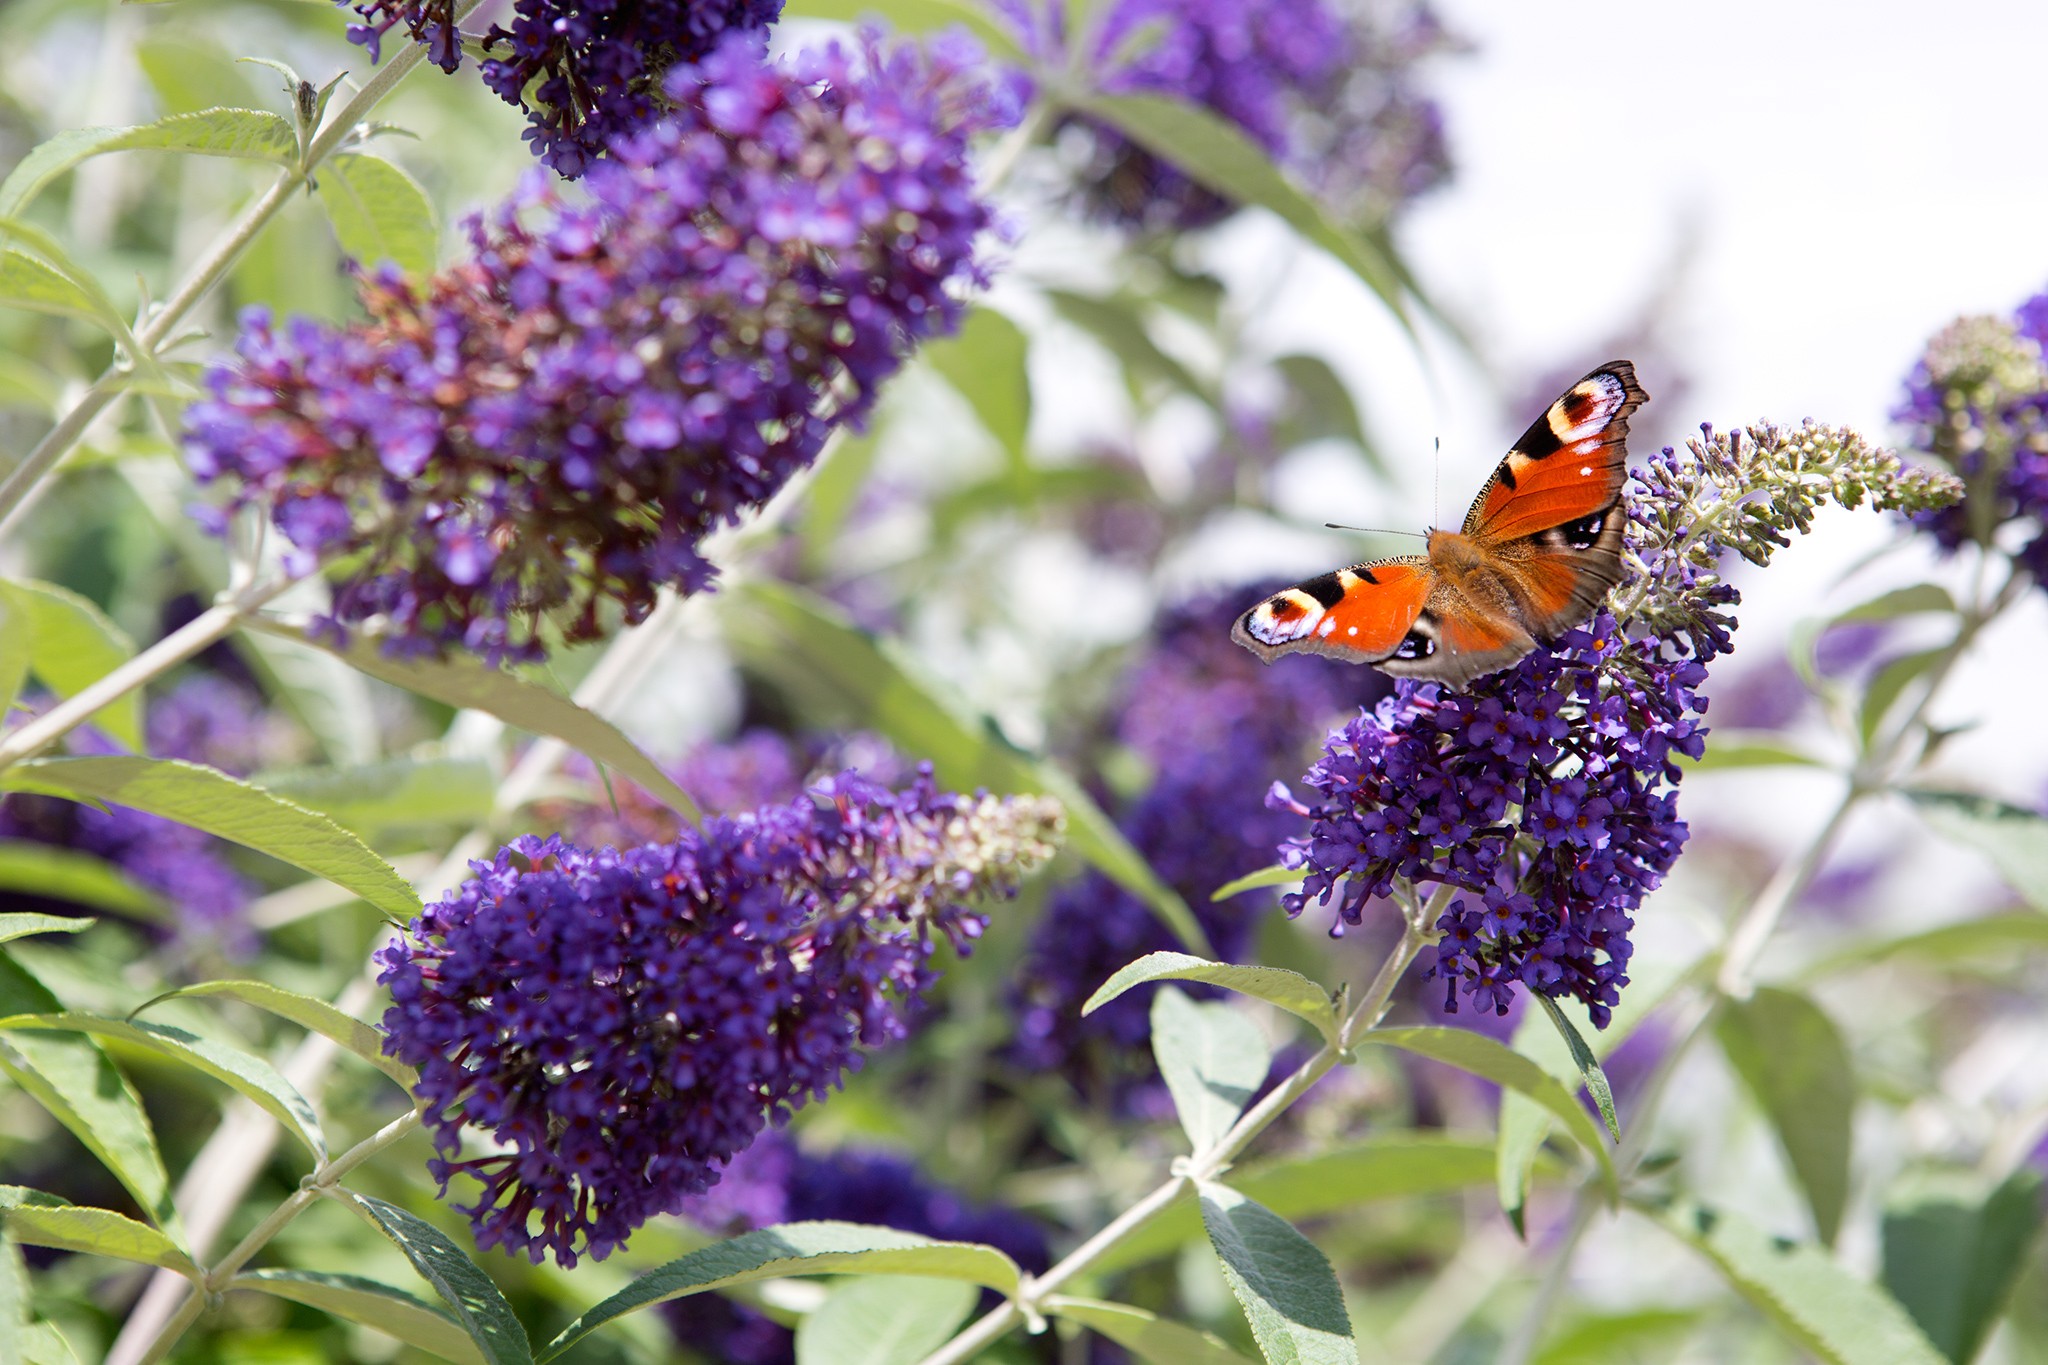 Buddleia provides nectar for butterflies